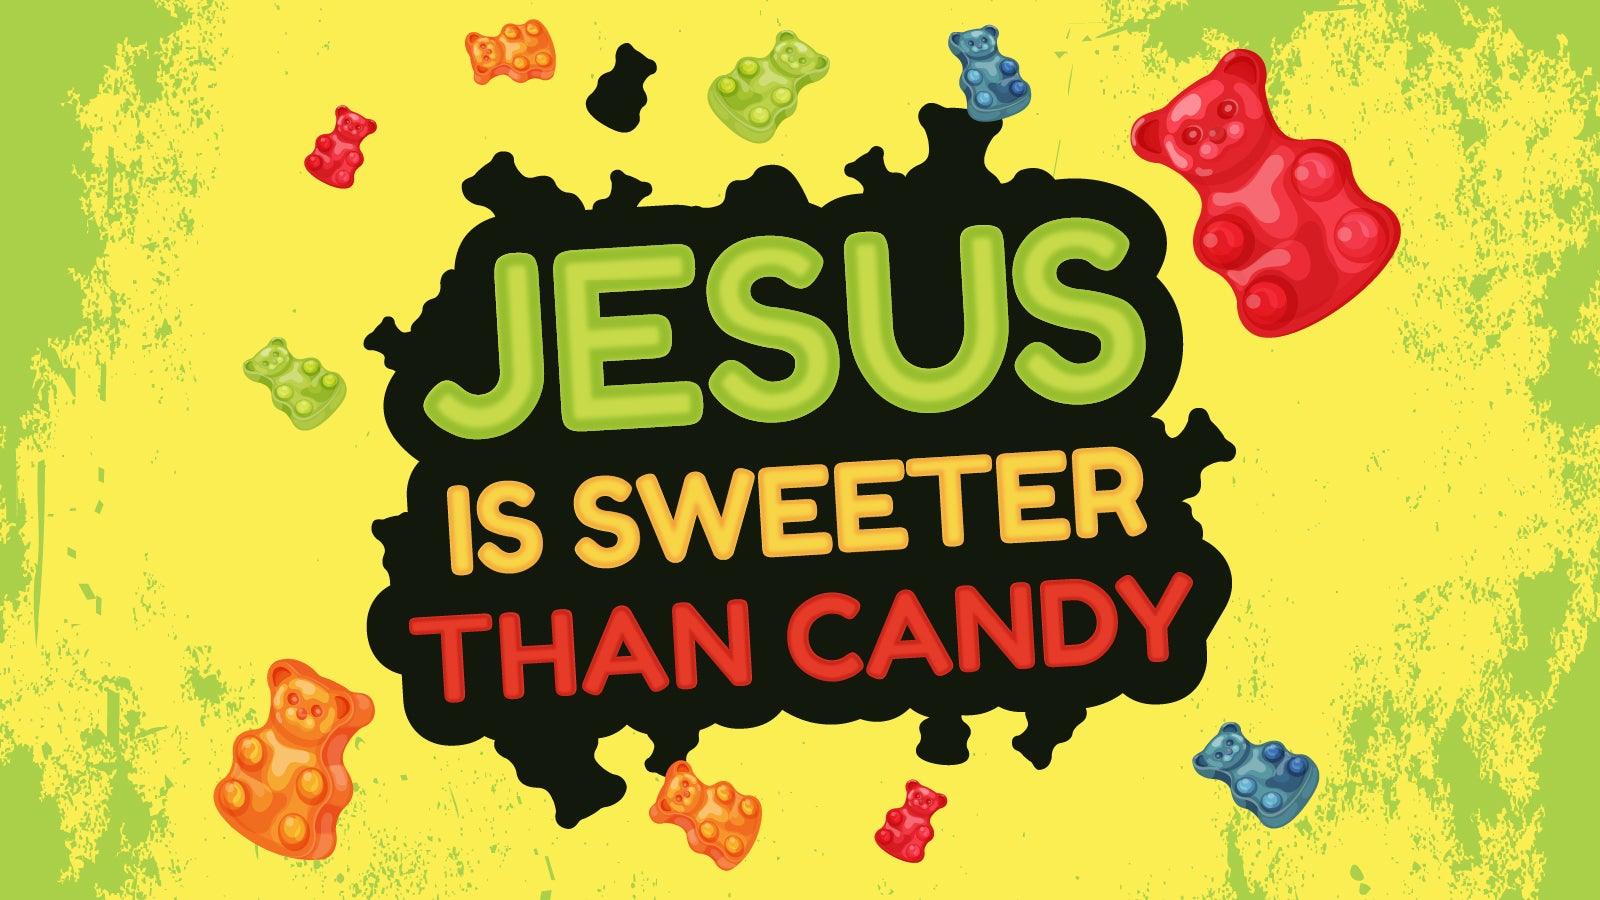 Jesus Is Sweeter Than Candy: 4-Week Children's Ministry Curriculum (downland only) - Sunday School Store 